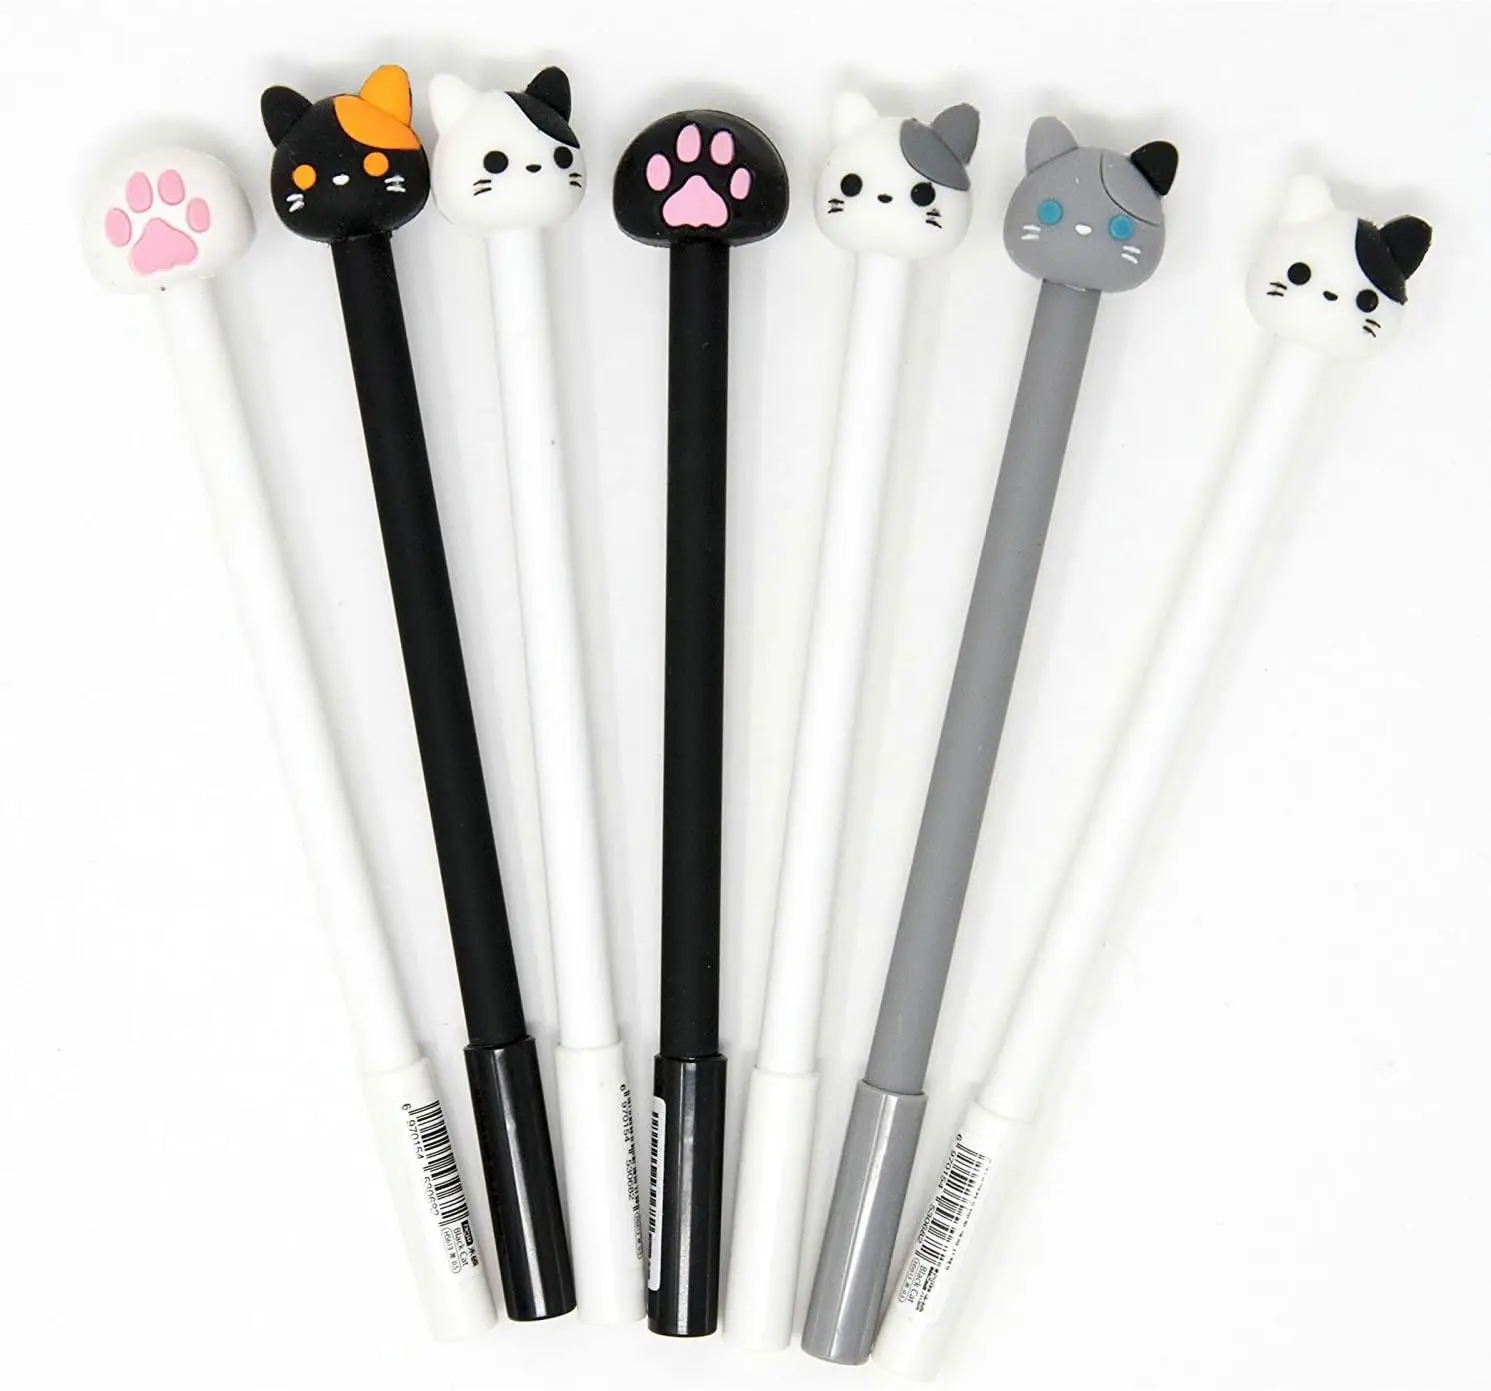 24 Pcs Gel Pens Set Fashion Cute Colorful Cute Kawaii Lovely Dog Cat Paw Claw Gel Ball Pens Office School Supply Stationery new women girls lovely winter warm fingerless gloves student fluffy bear plush paw claw half finger gloves mittens new fashion